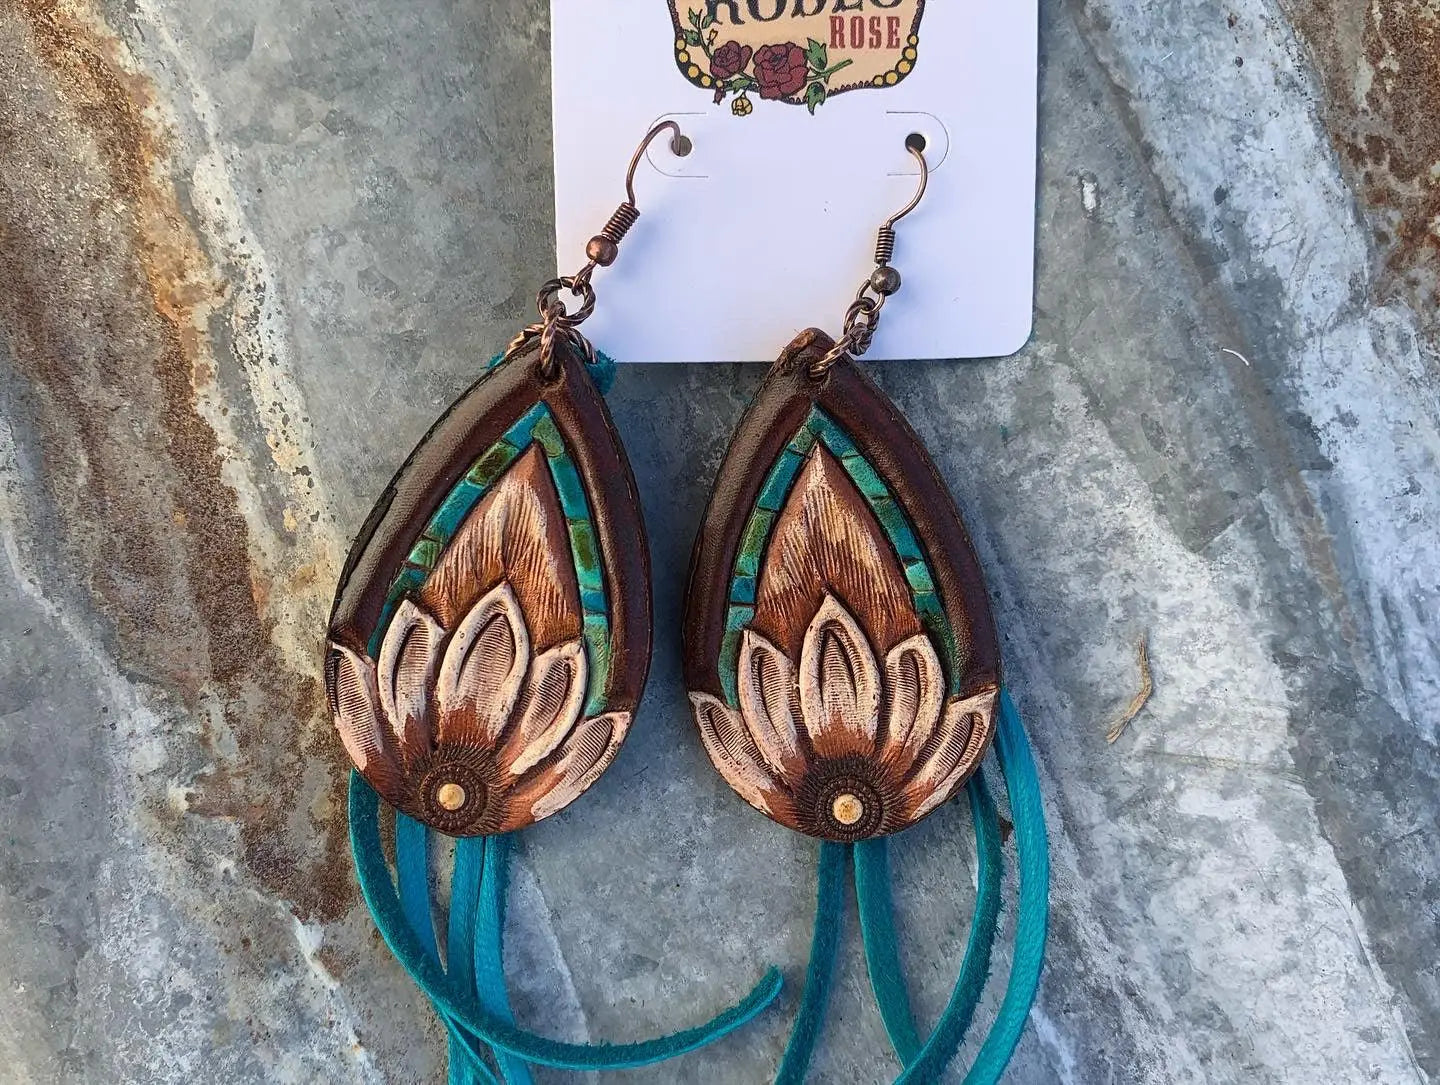 The Tad Hand Tooled Leather Earrings with Turquoise Border and Turquoise Deerskin Fringe The Rodeo Rose